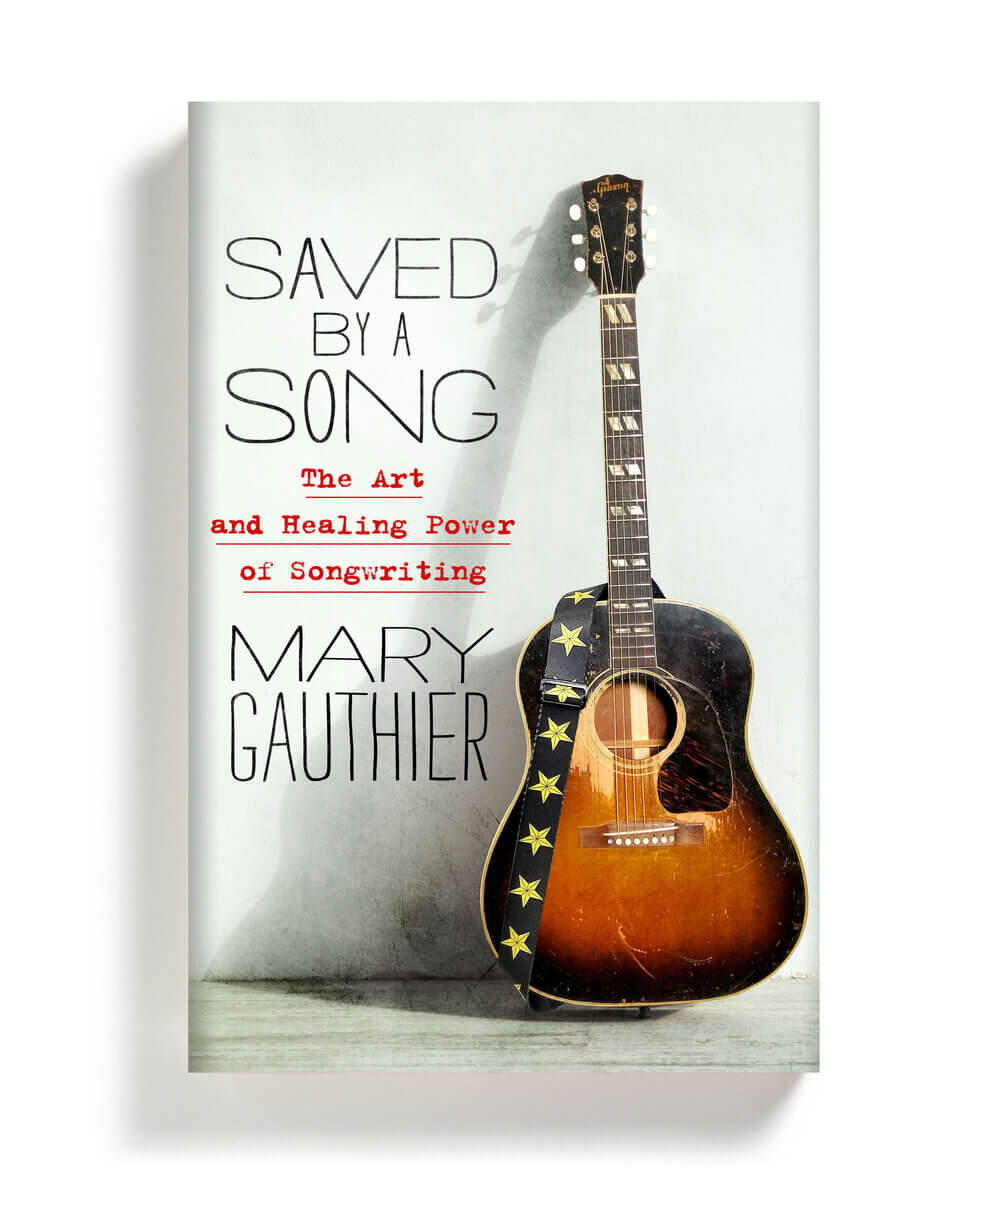 BOOK REVIEW: Saved by a Song: The Art and Healing Power of Songwriting